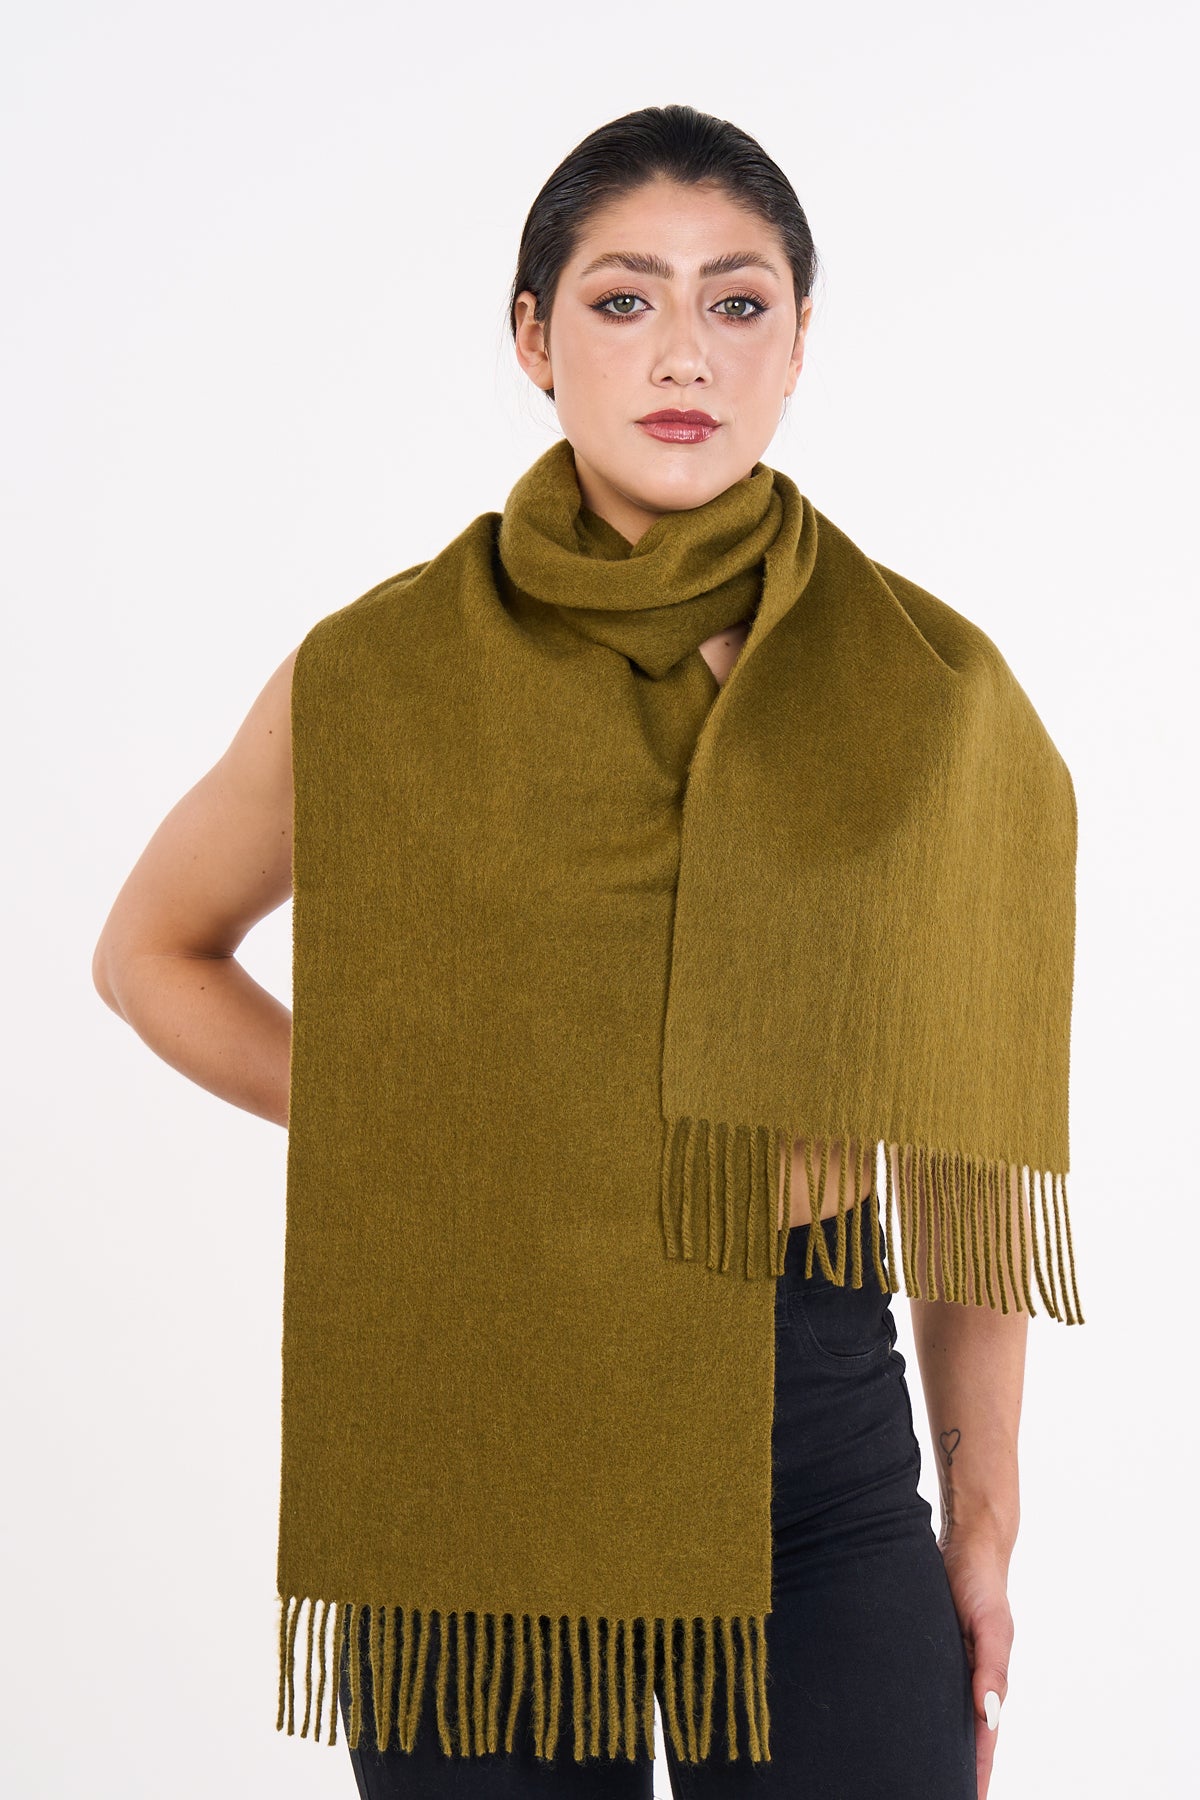 Scarf Plain Green 100% Pure Lambswool